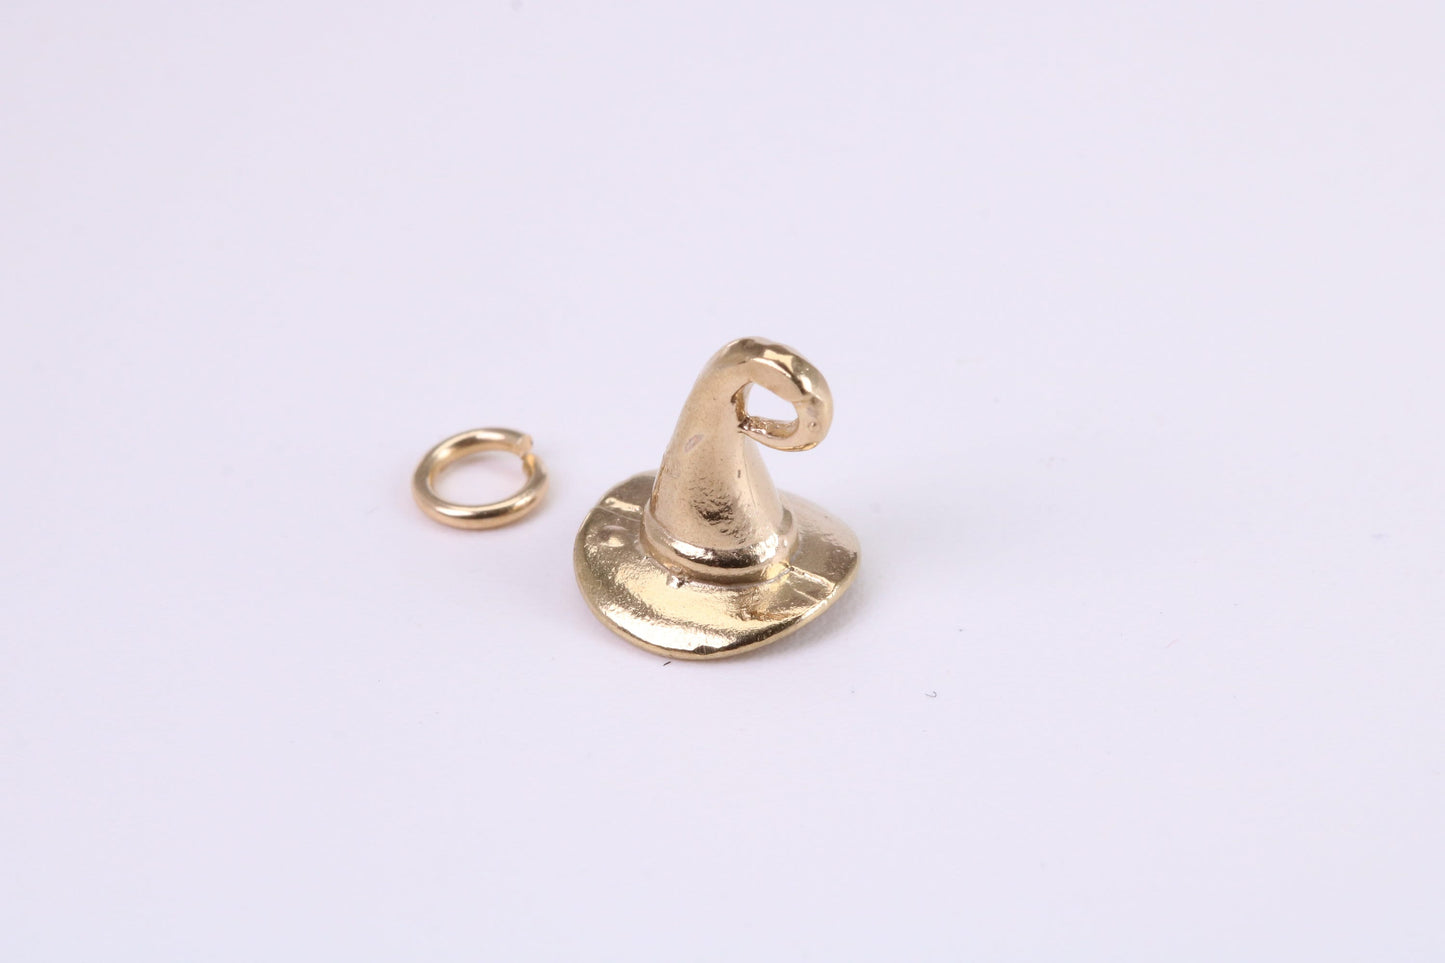 Wizards Hat Charm, Traditional Charm, Made from Solid Yellow Gold, British Hallmarked, Complete with Attachment Link